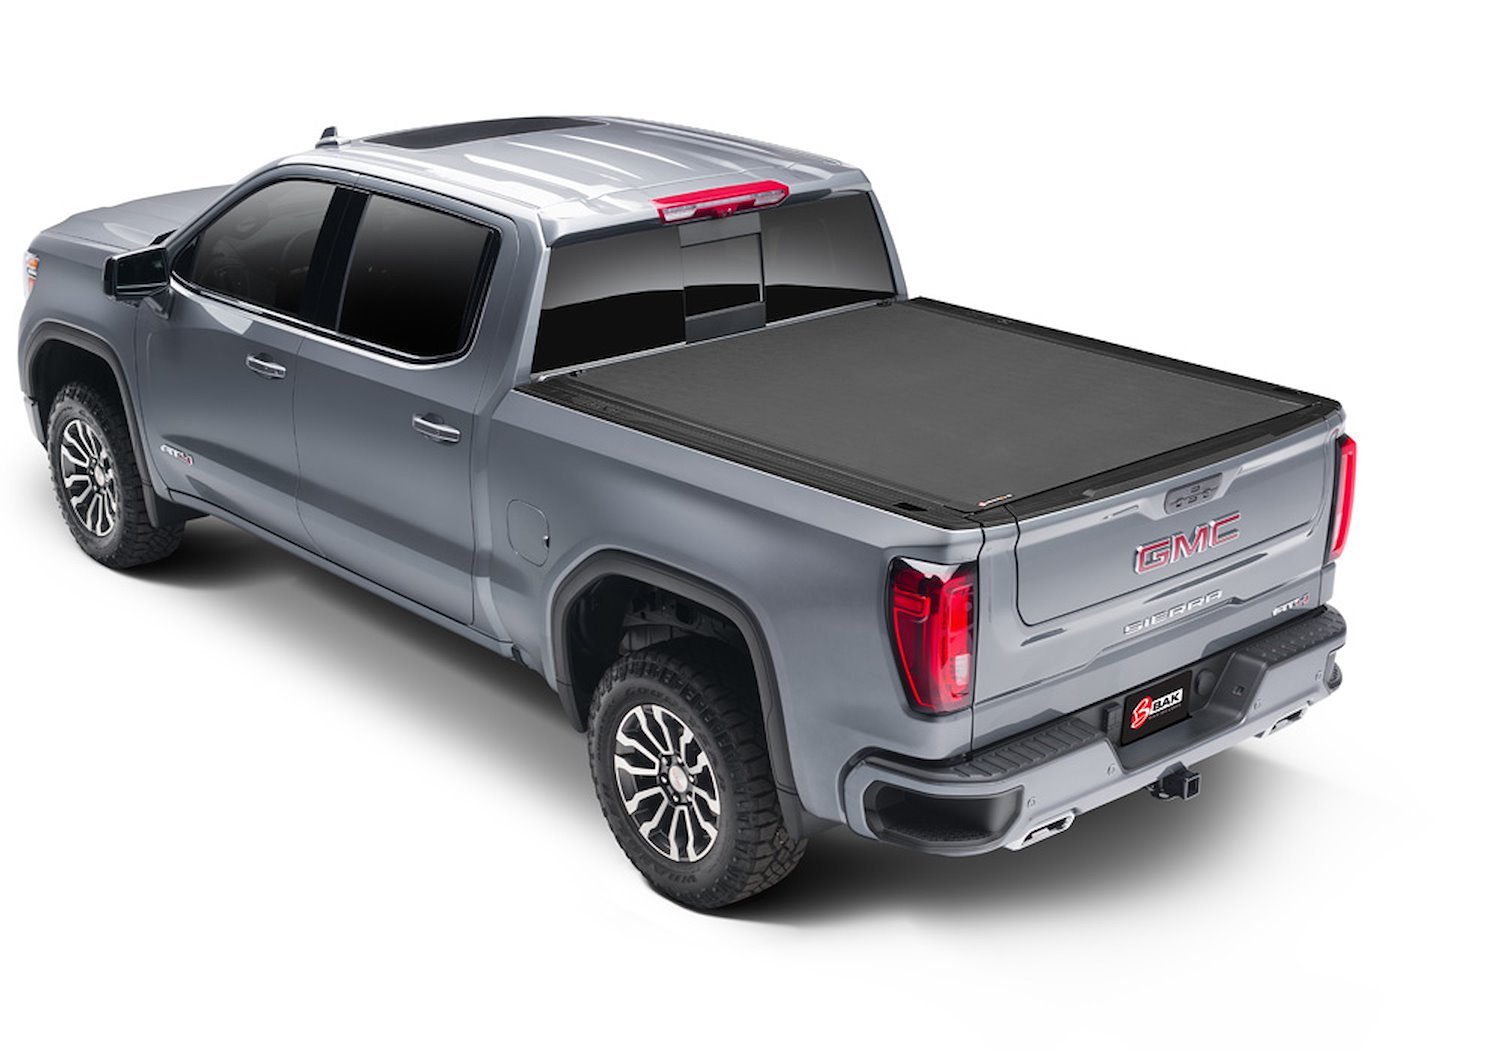 80146 Revolver X4s for Fits Select GM Canyon/Colorado 5.2 ft. Bed, Roll-Up Hard Cover Style [Black Finish]